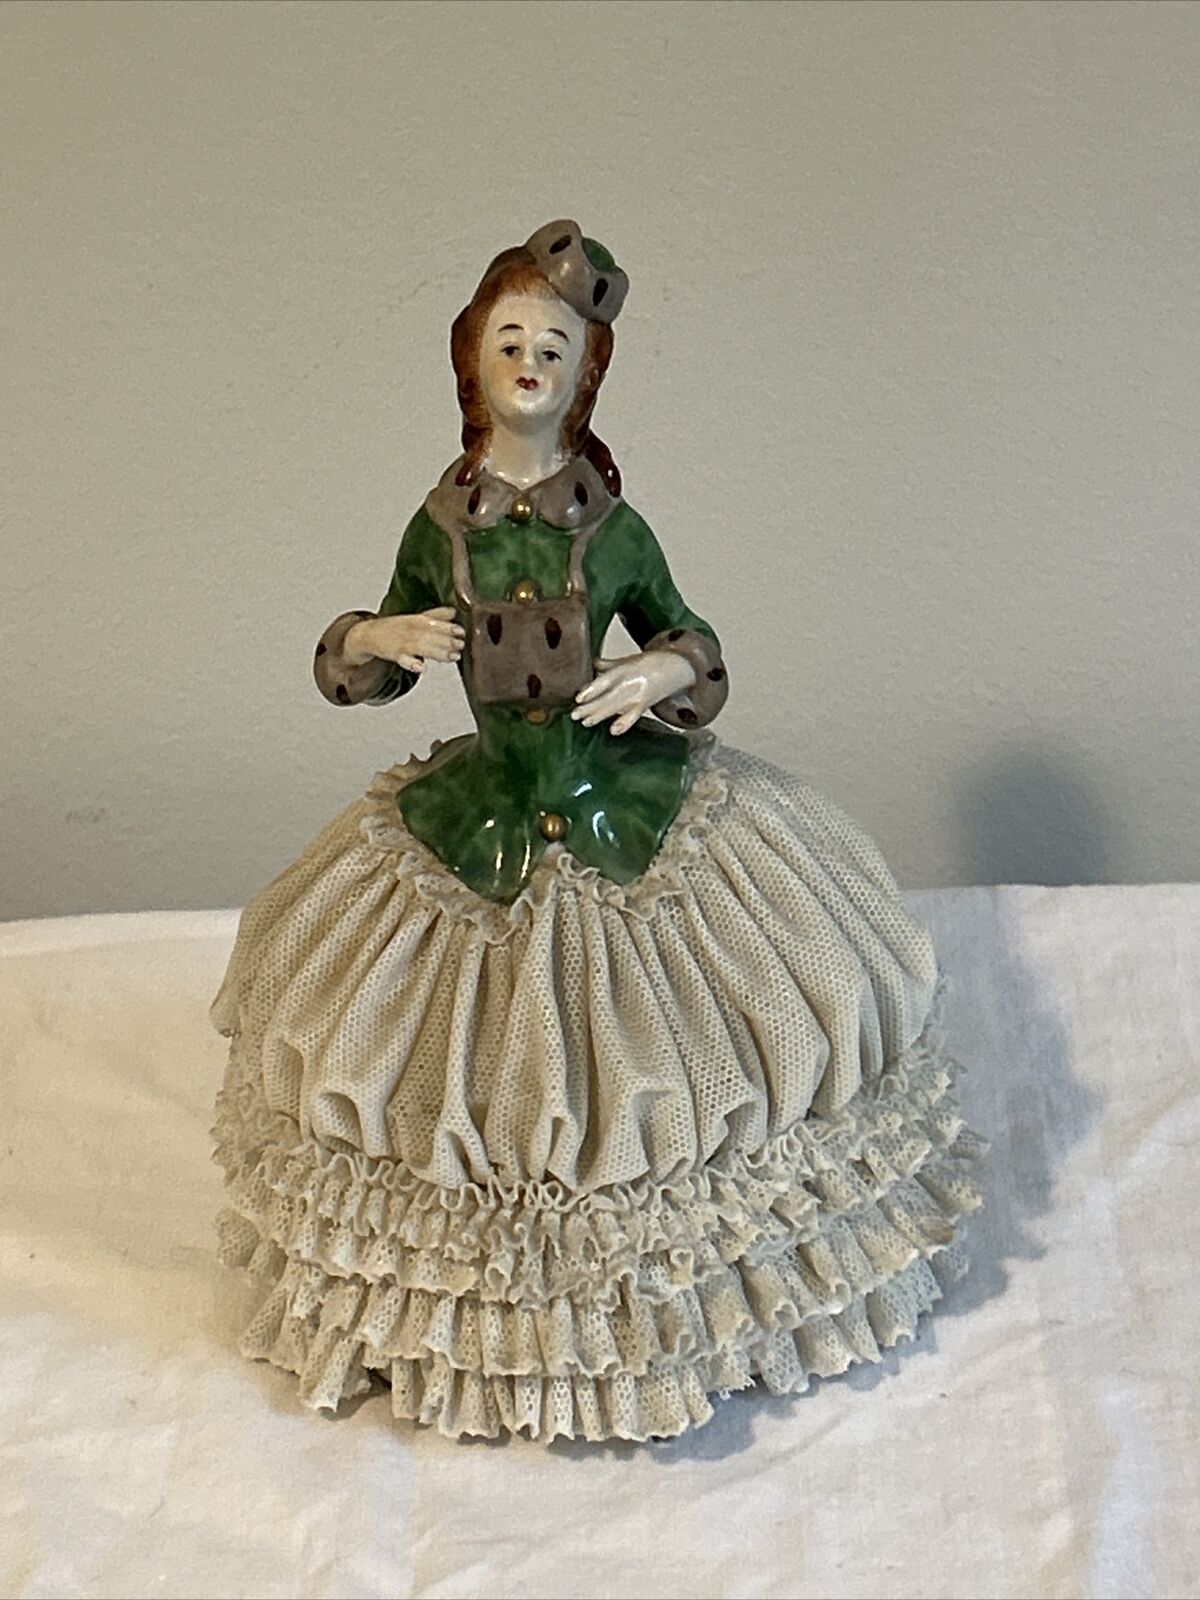 Vintage Dresden Lace Figurine Victorian Woman With Purse - Blue Goat Makers Mark